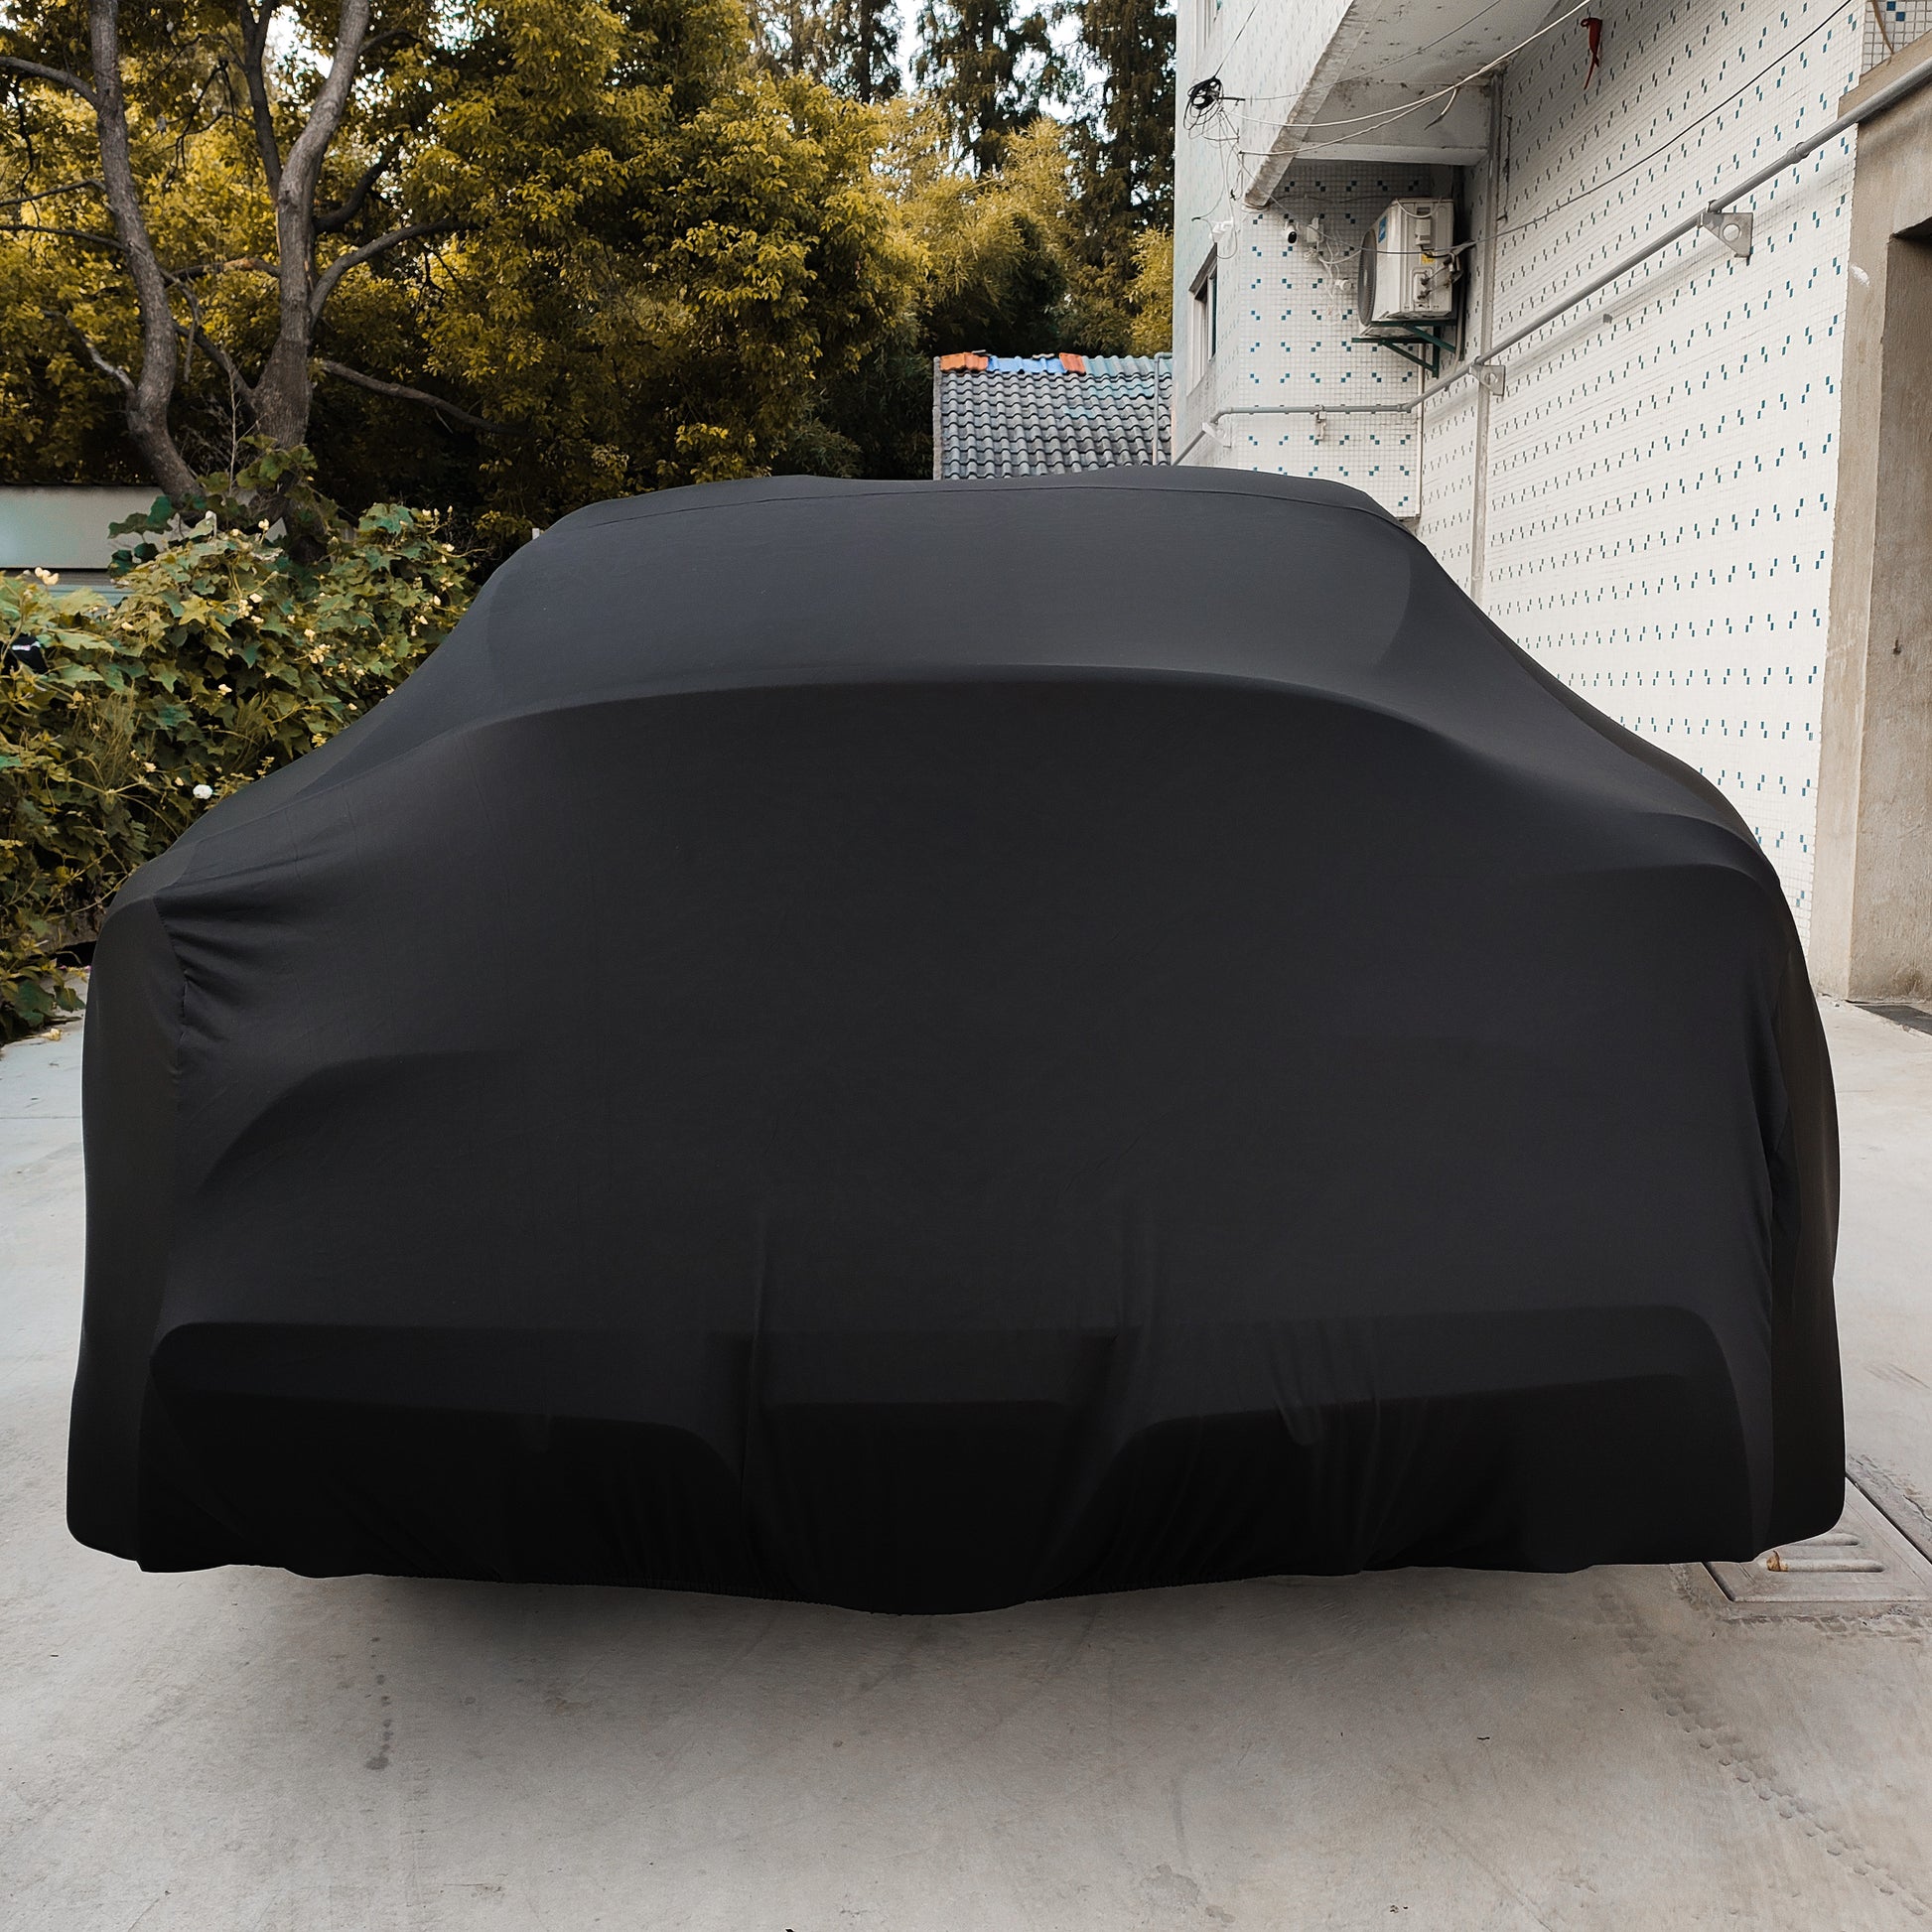 Weatherproof Car Cover Compatible with Toyota Supra 1990-1998 - 5L Outdoor  & Indoor - Protect from Rain, Snow, Hail, UV Rays, Sun - Fleece Lining -  Anti-Theft Cable Lock, Bag & Wind Straps 